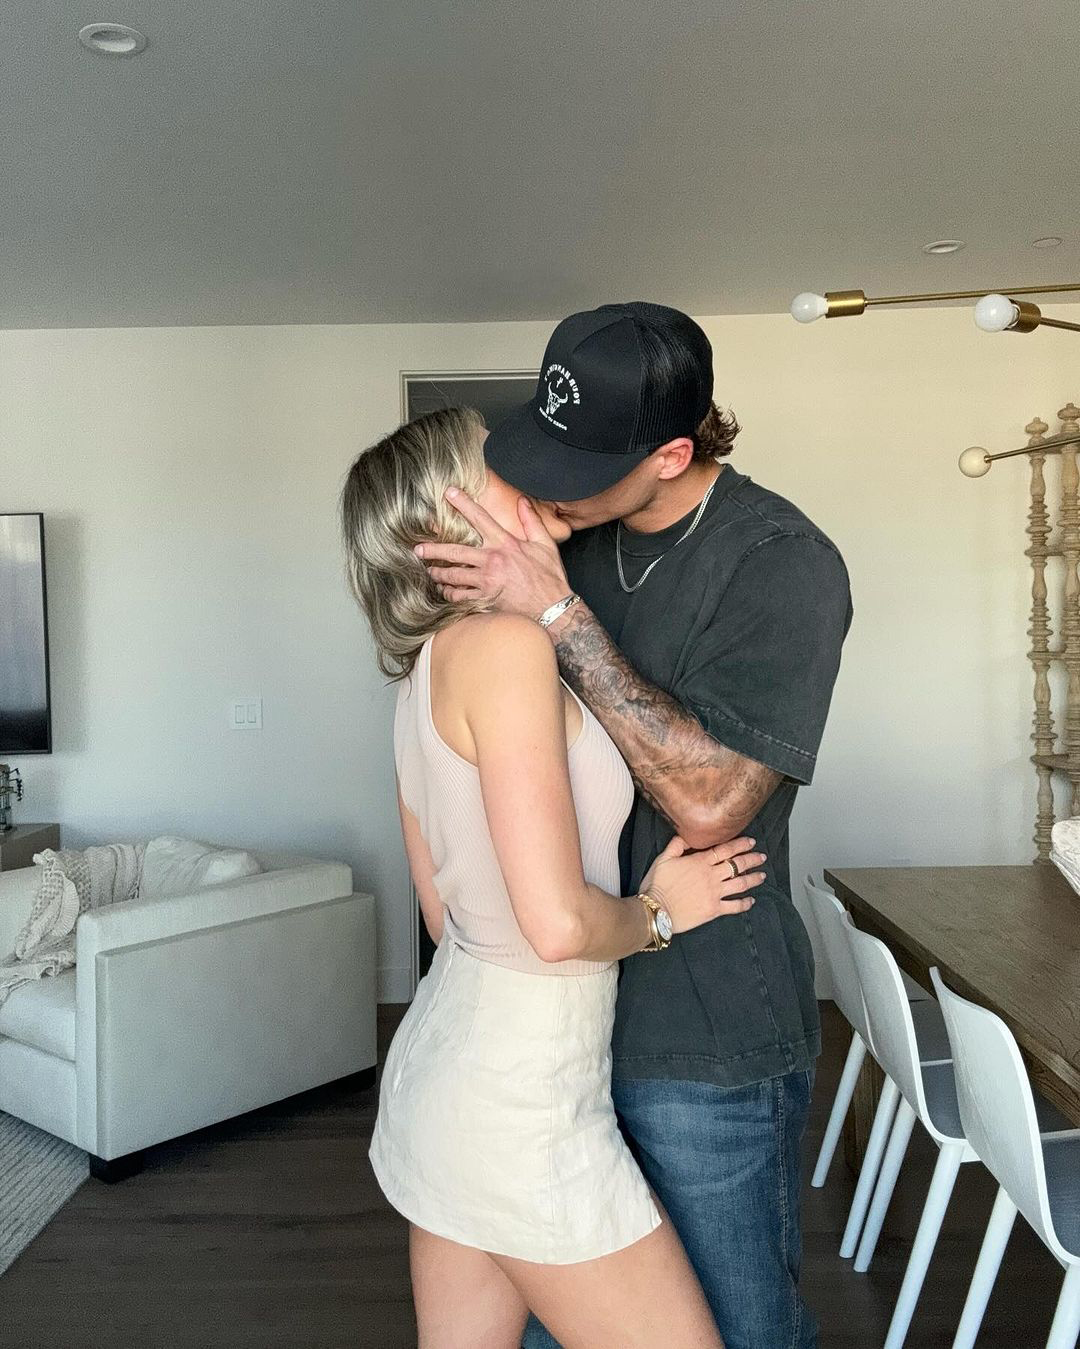 Kristin shared her kiss with Mark after the backlash over their age gap